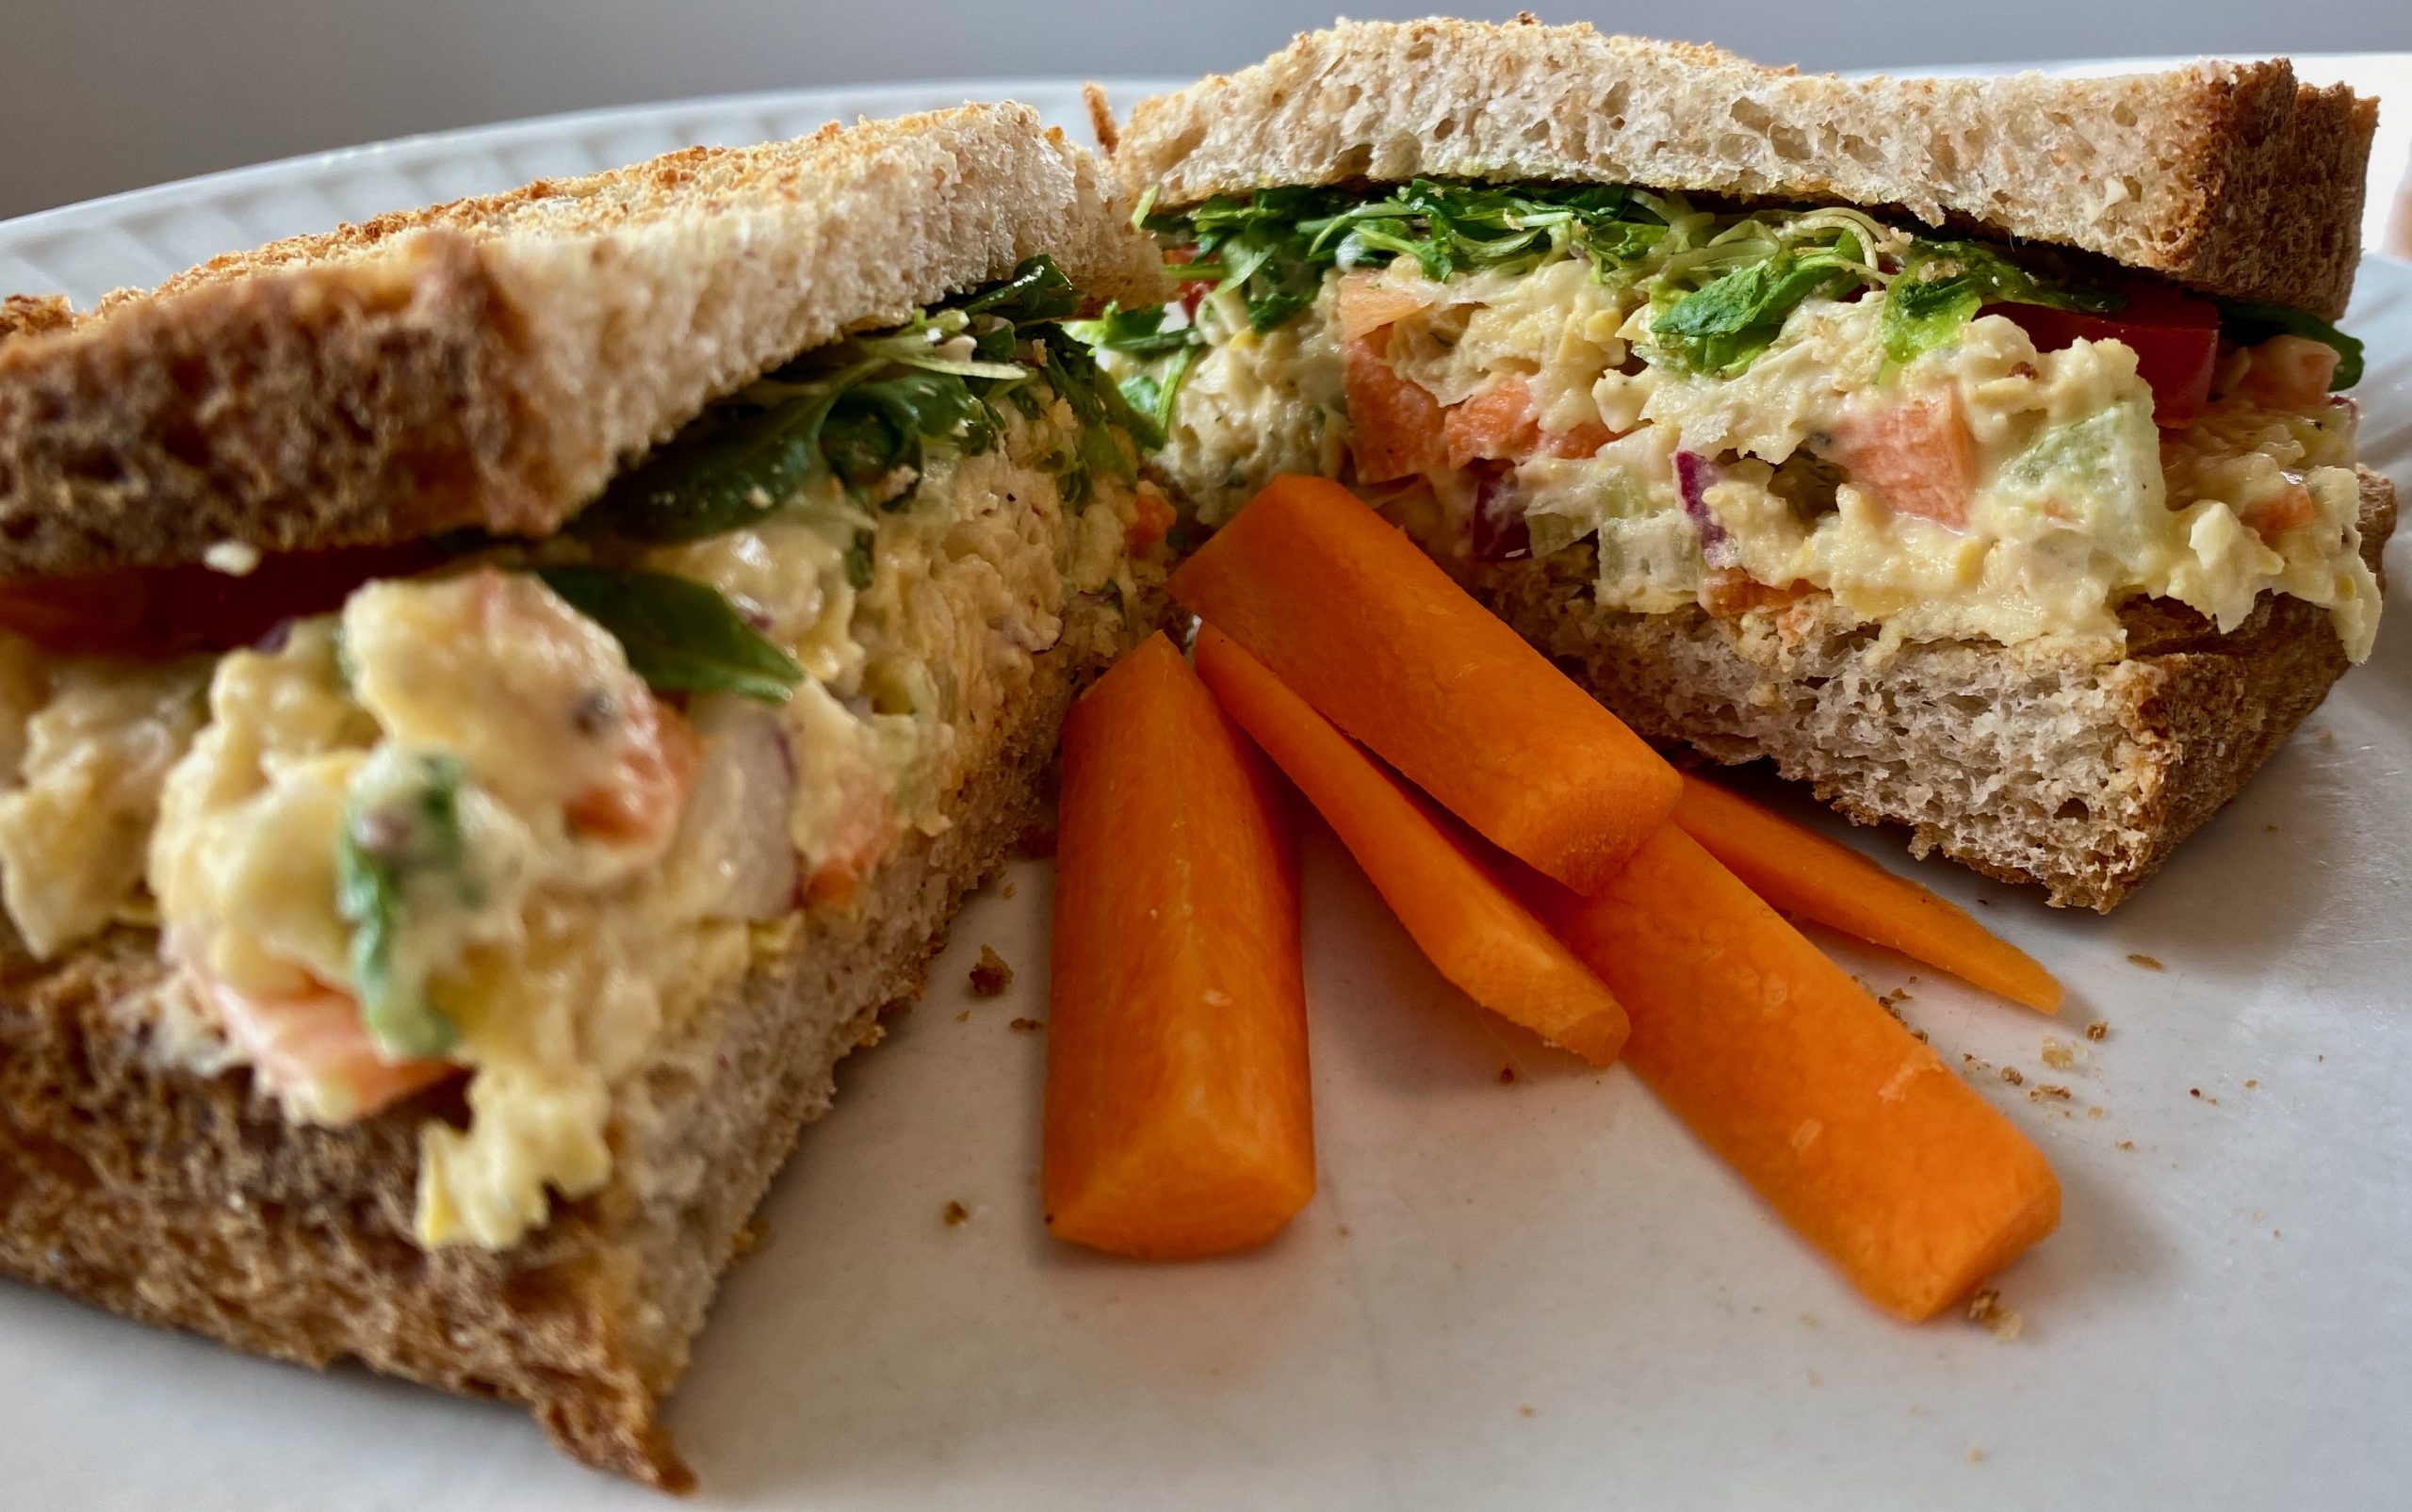 Plated is a sandwich cut in two and set at an open angle. Carrots are placed in between both slices of the sandwich.